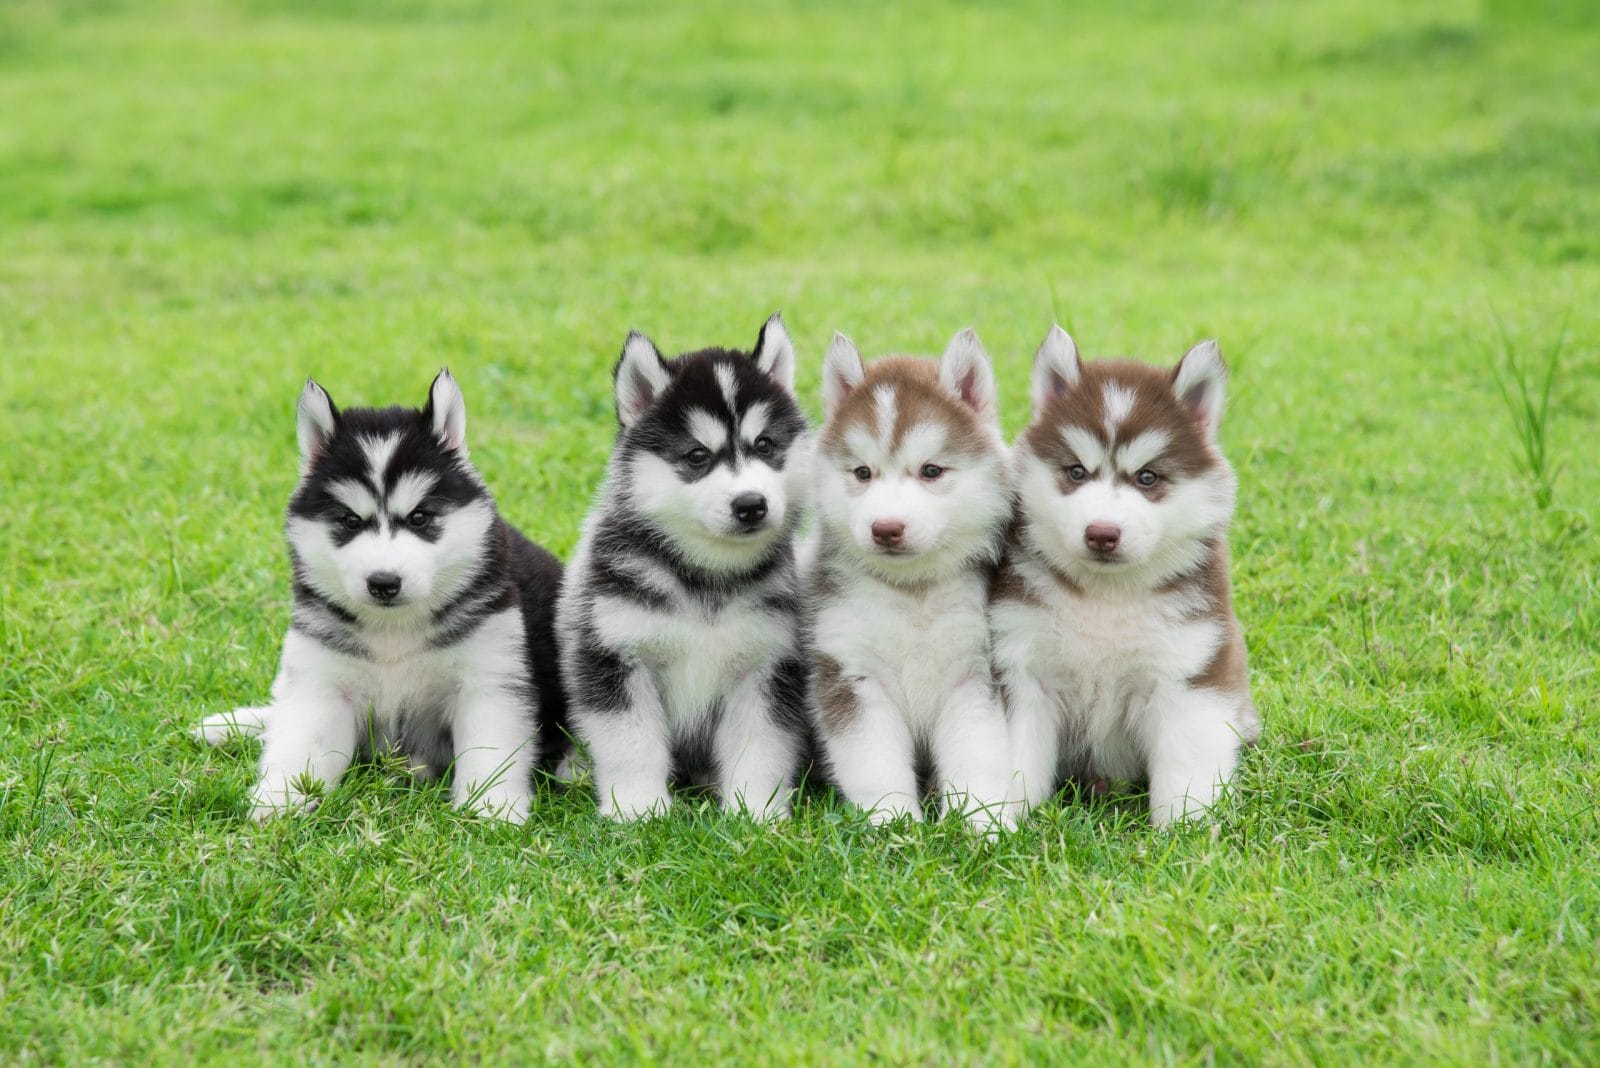 Rescuers Go Save Three Adult Huskies and Find Eight Abandoned Puppies Too!